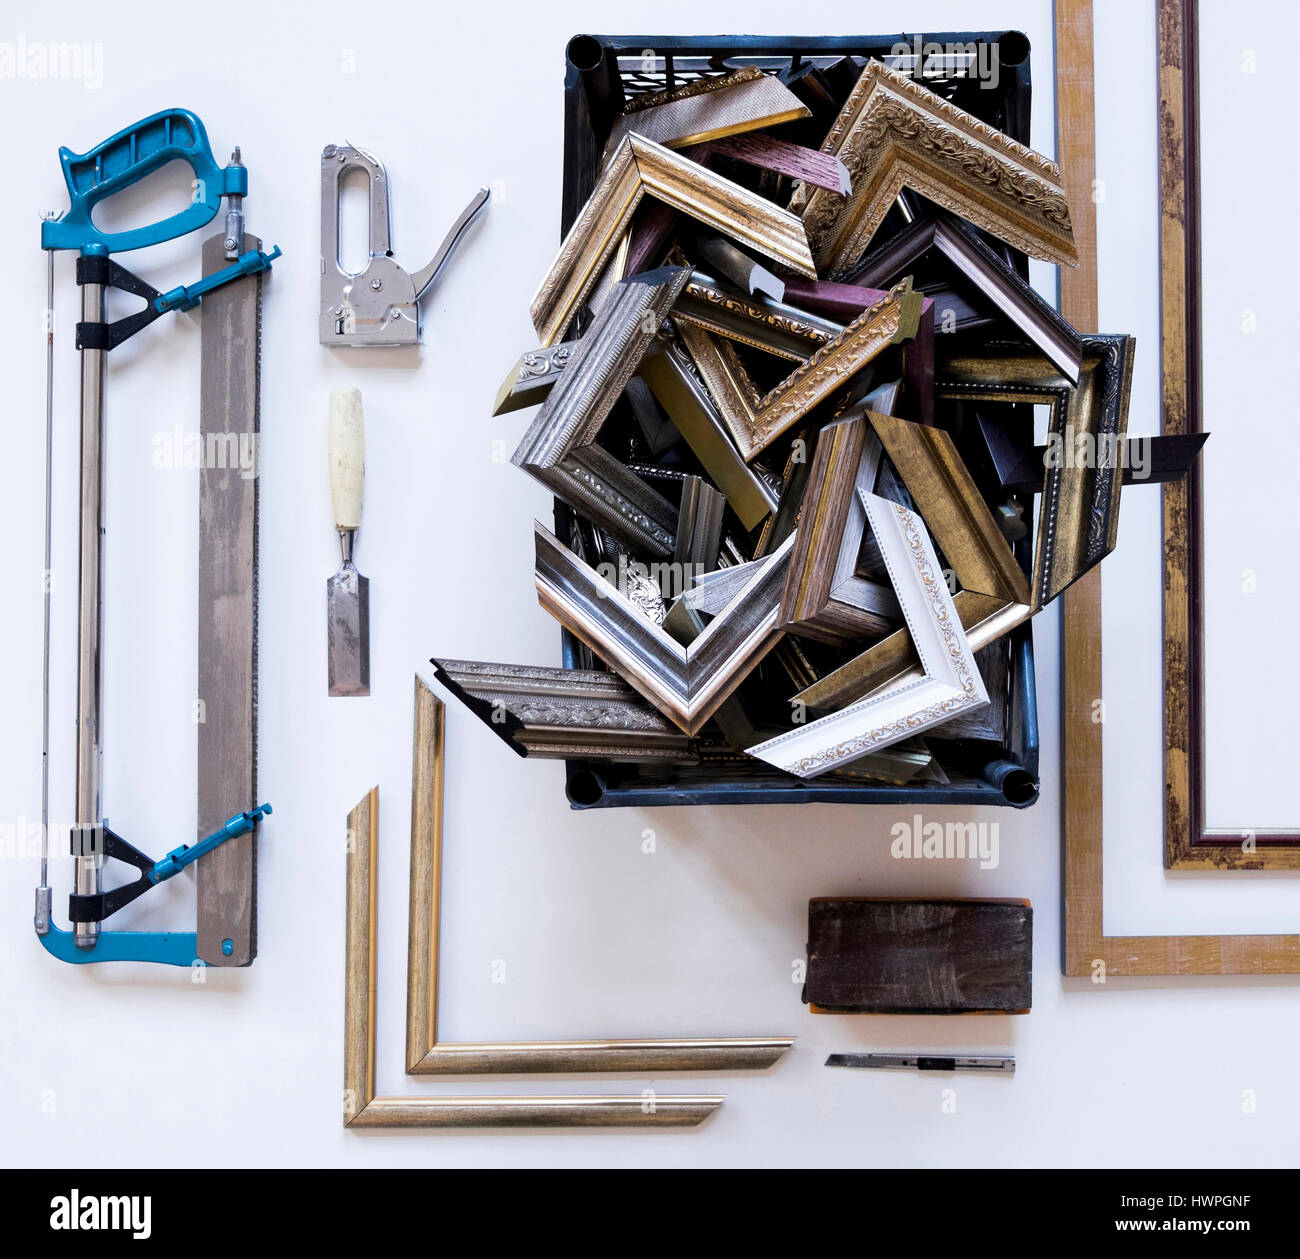 Overhead view of picture frames and corners with work tools on table in workshop Stock Photo